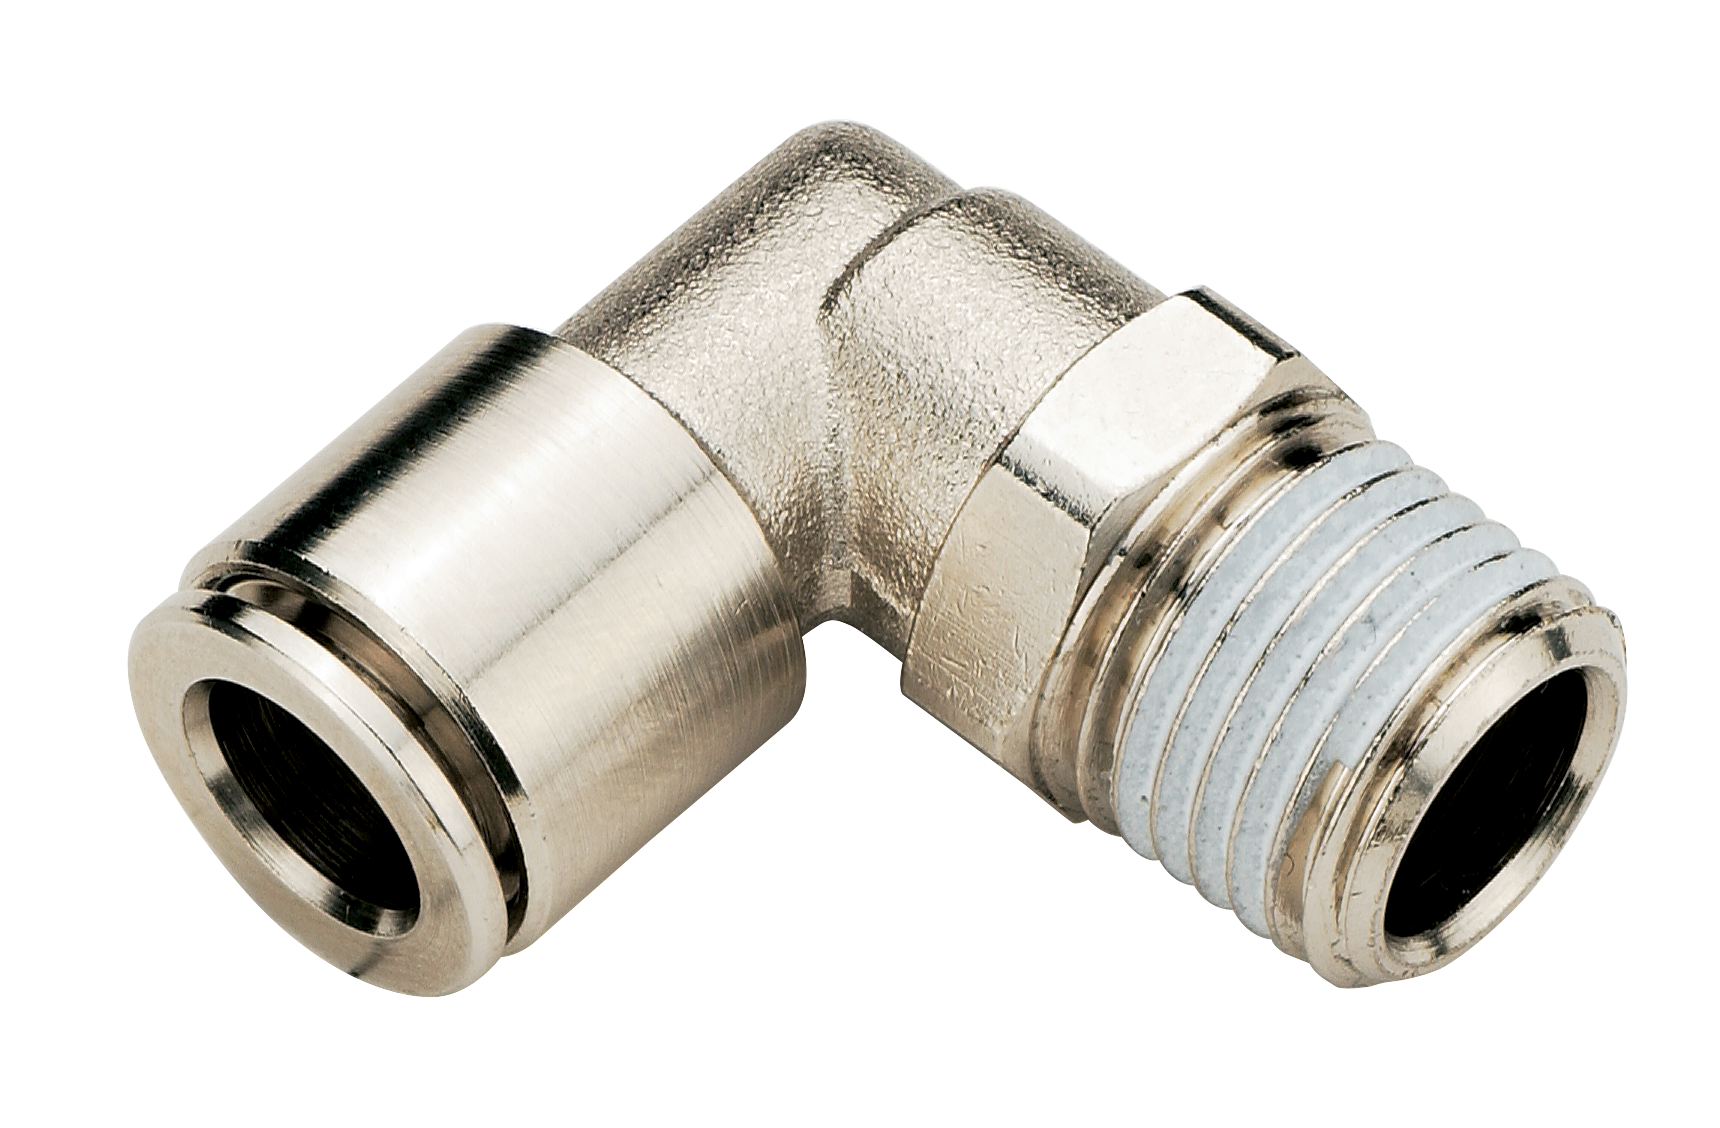 Implantation's fittings SWIVEL ELBOW MALE FITTING, TAPER Fittings and quick-connect couplings